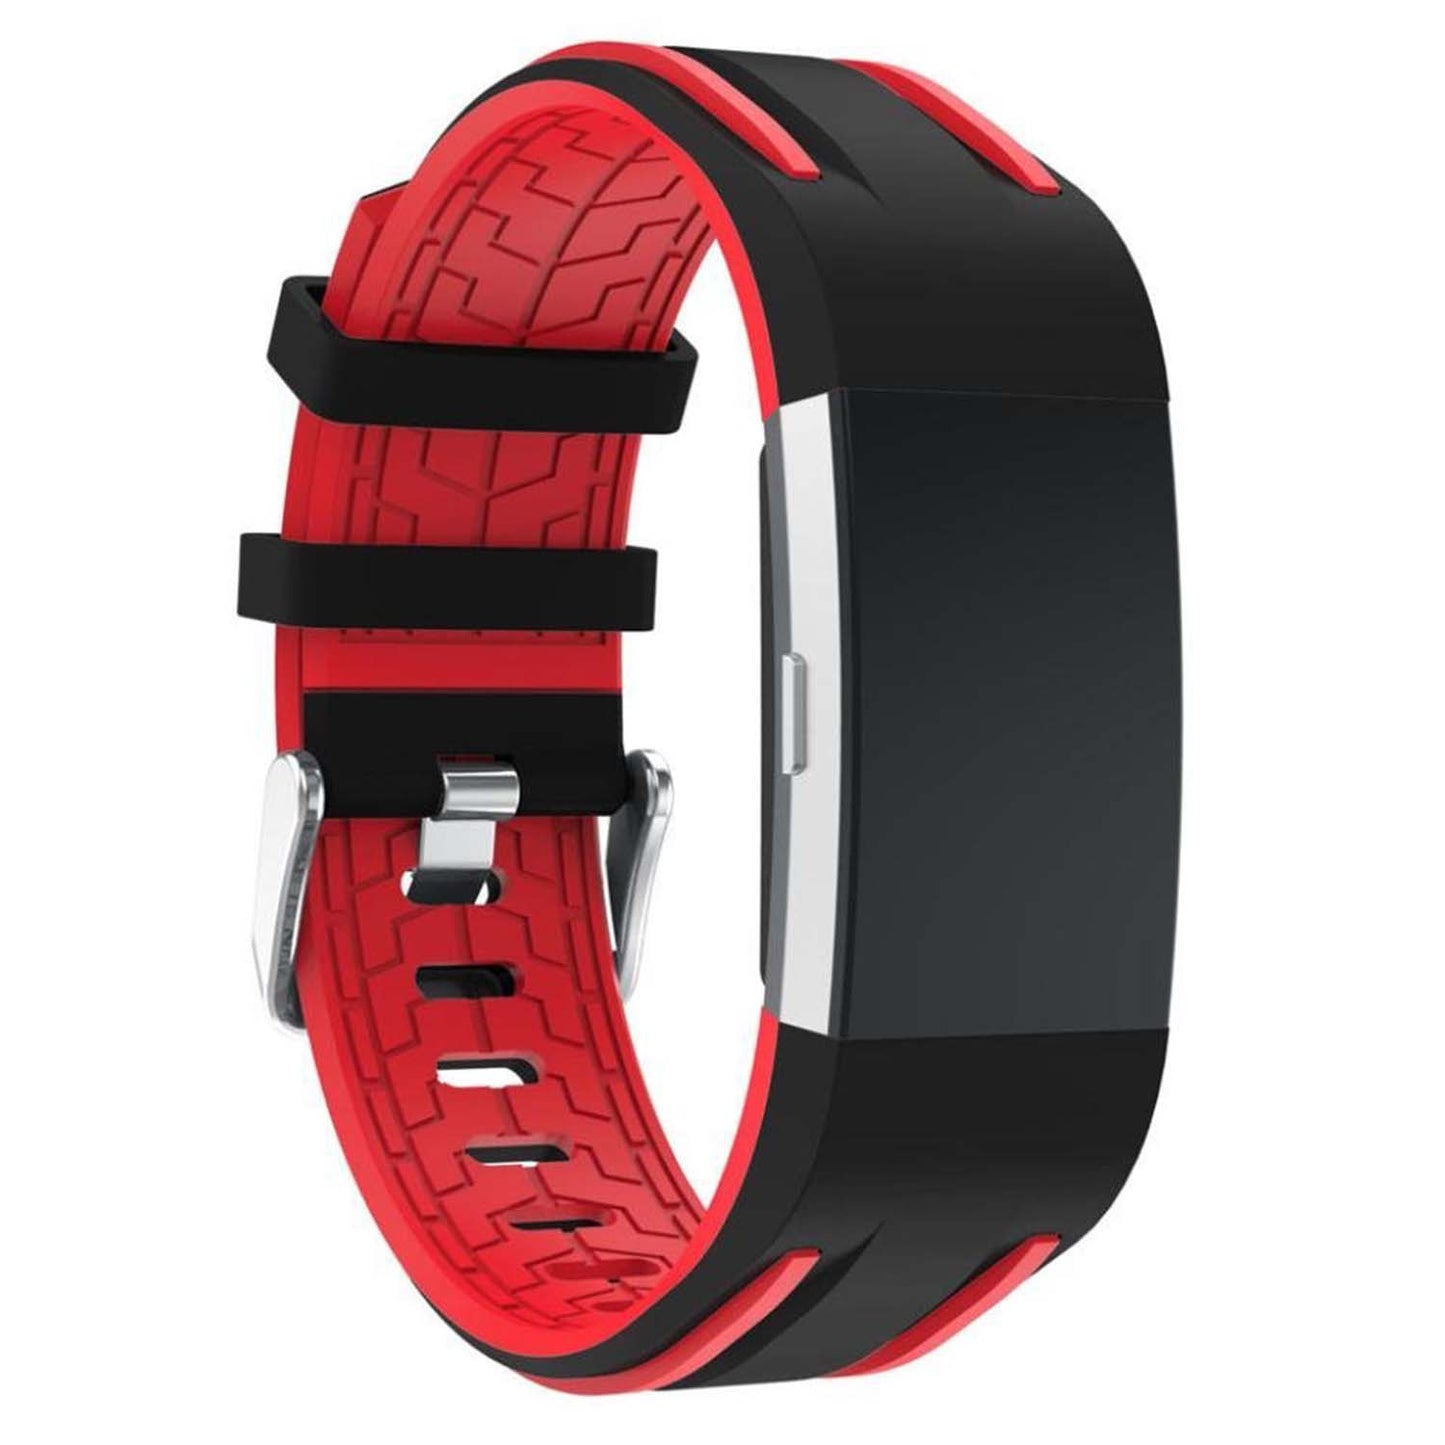 Racing Stripe Rubber Band for Fitbit Ionic